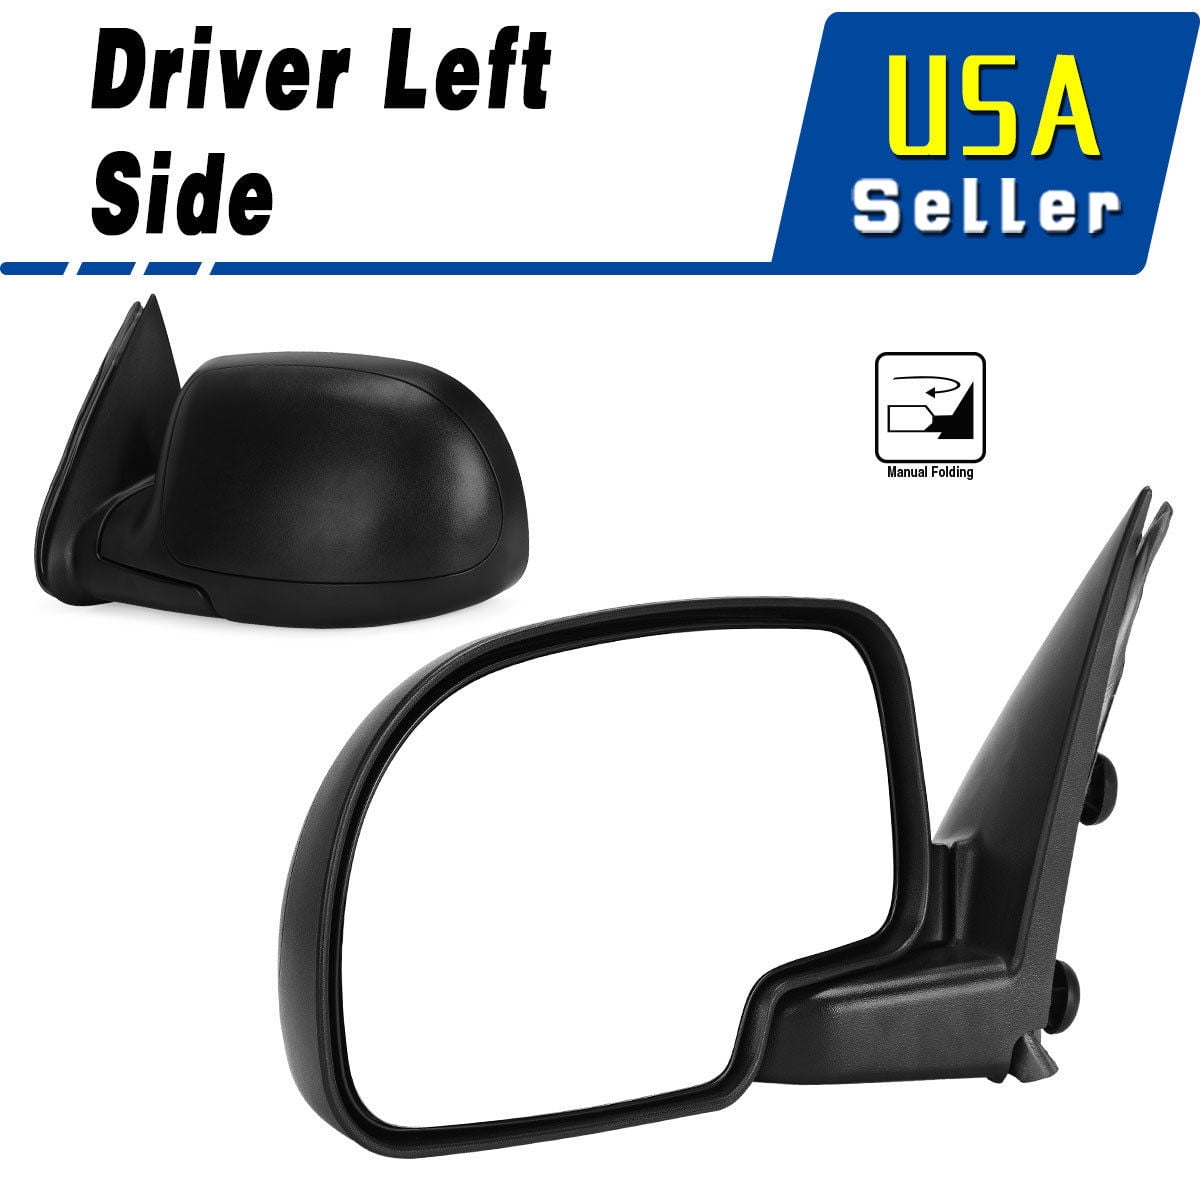 NEW SINGLE VINTAGE STYLE SIDE MIRROR CAN BE USED ON THE RIGHT OR LEFT SIDE . 